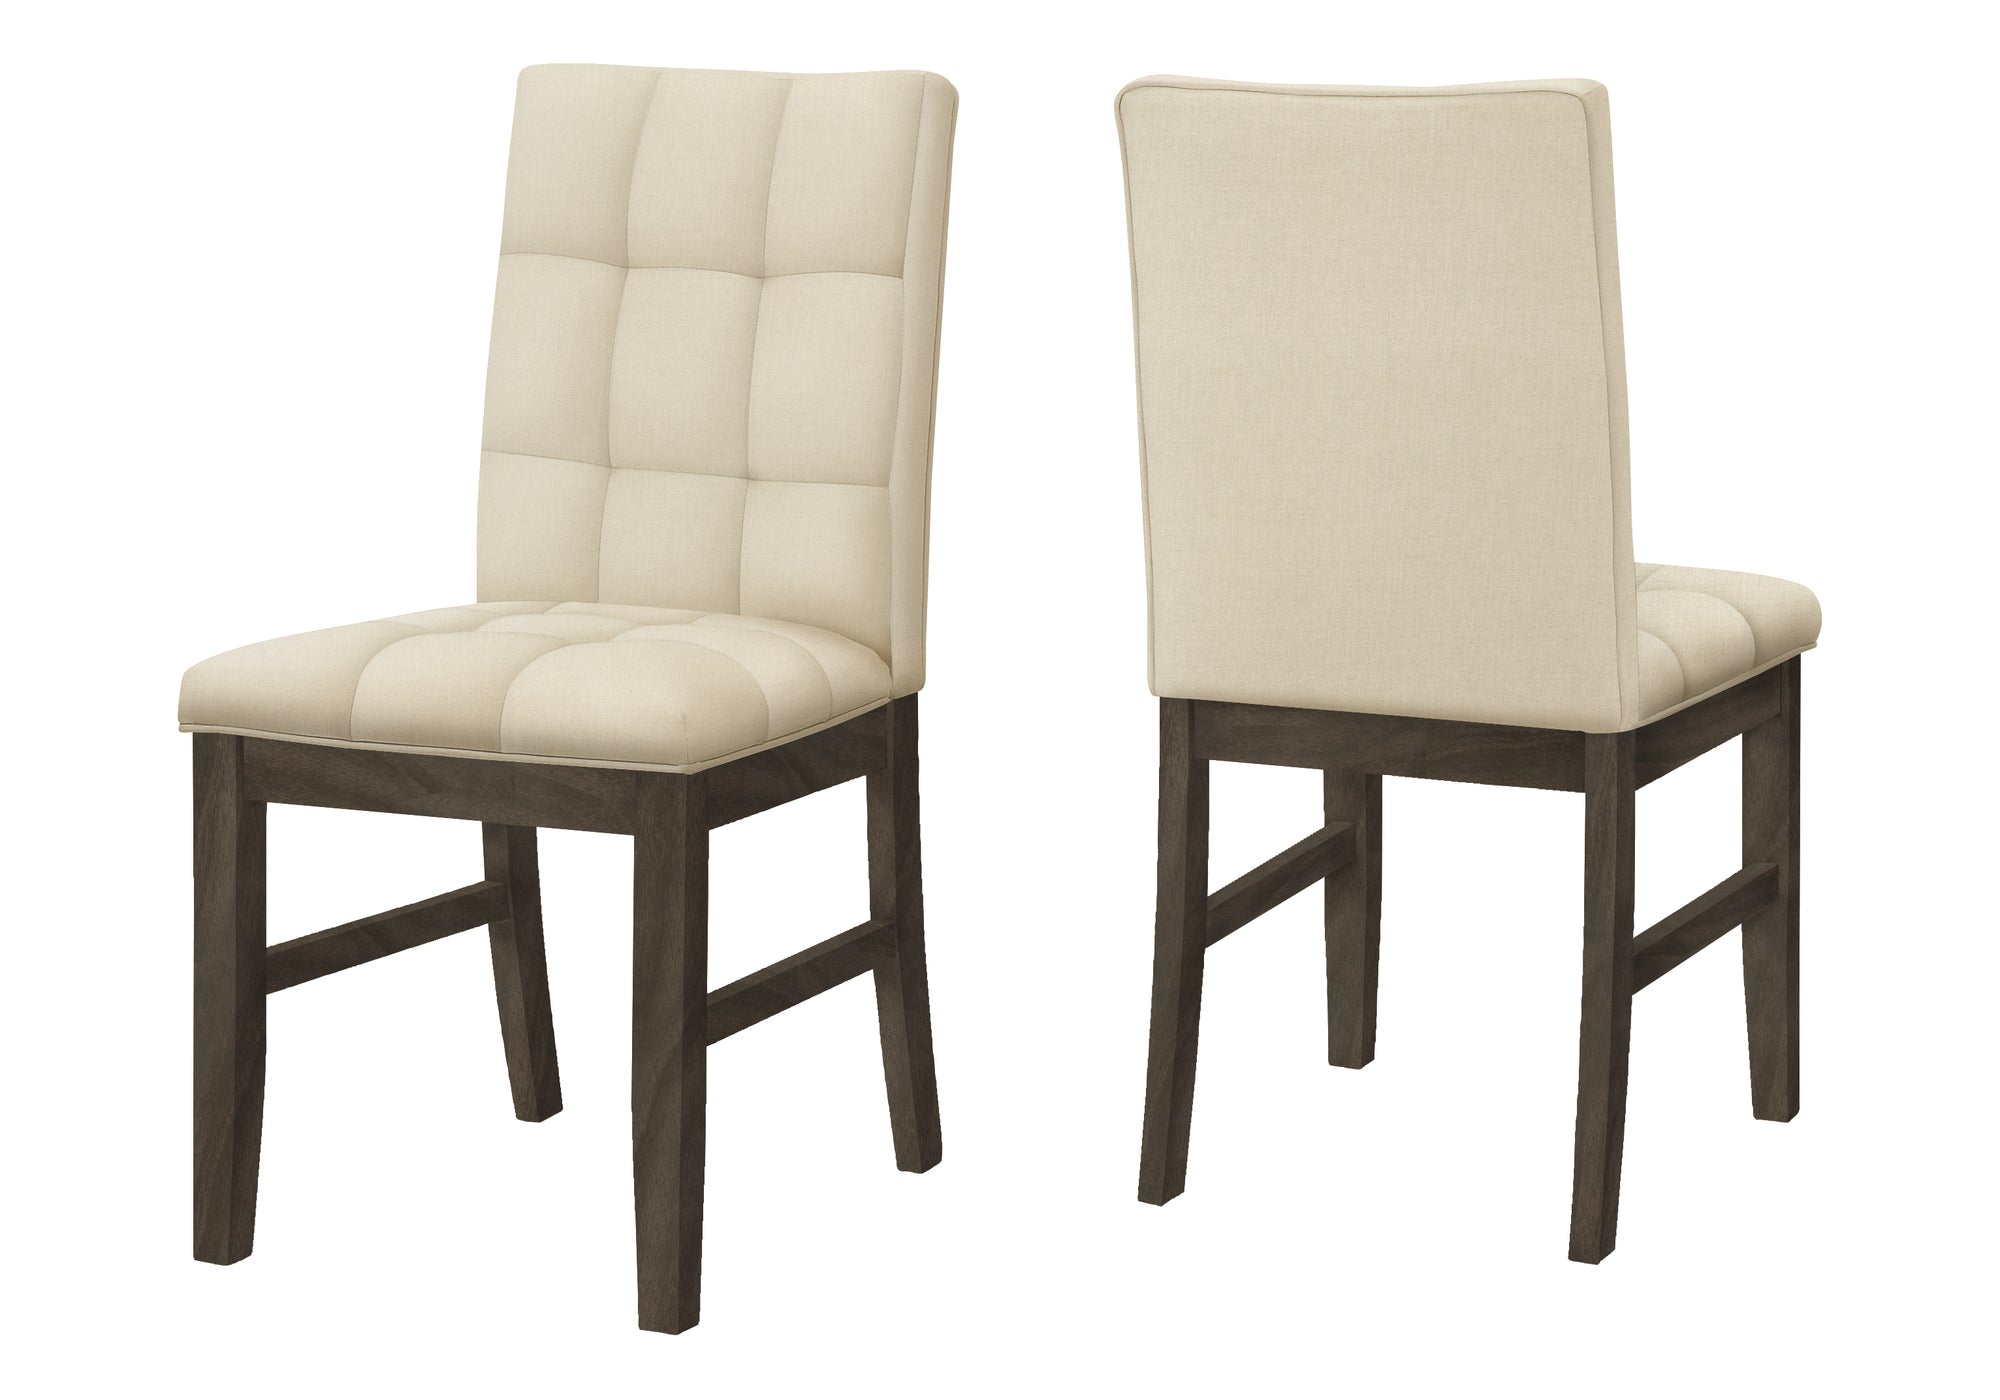 MN-371376    Dining Chair, 37" Height, Set Of 2, Upholstered, Dining Room, Kitchen, Cream Fabric, Grey Solid Wood, Transitional